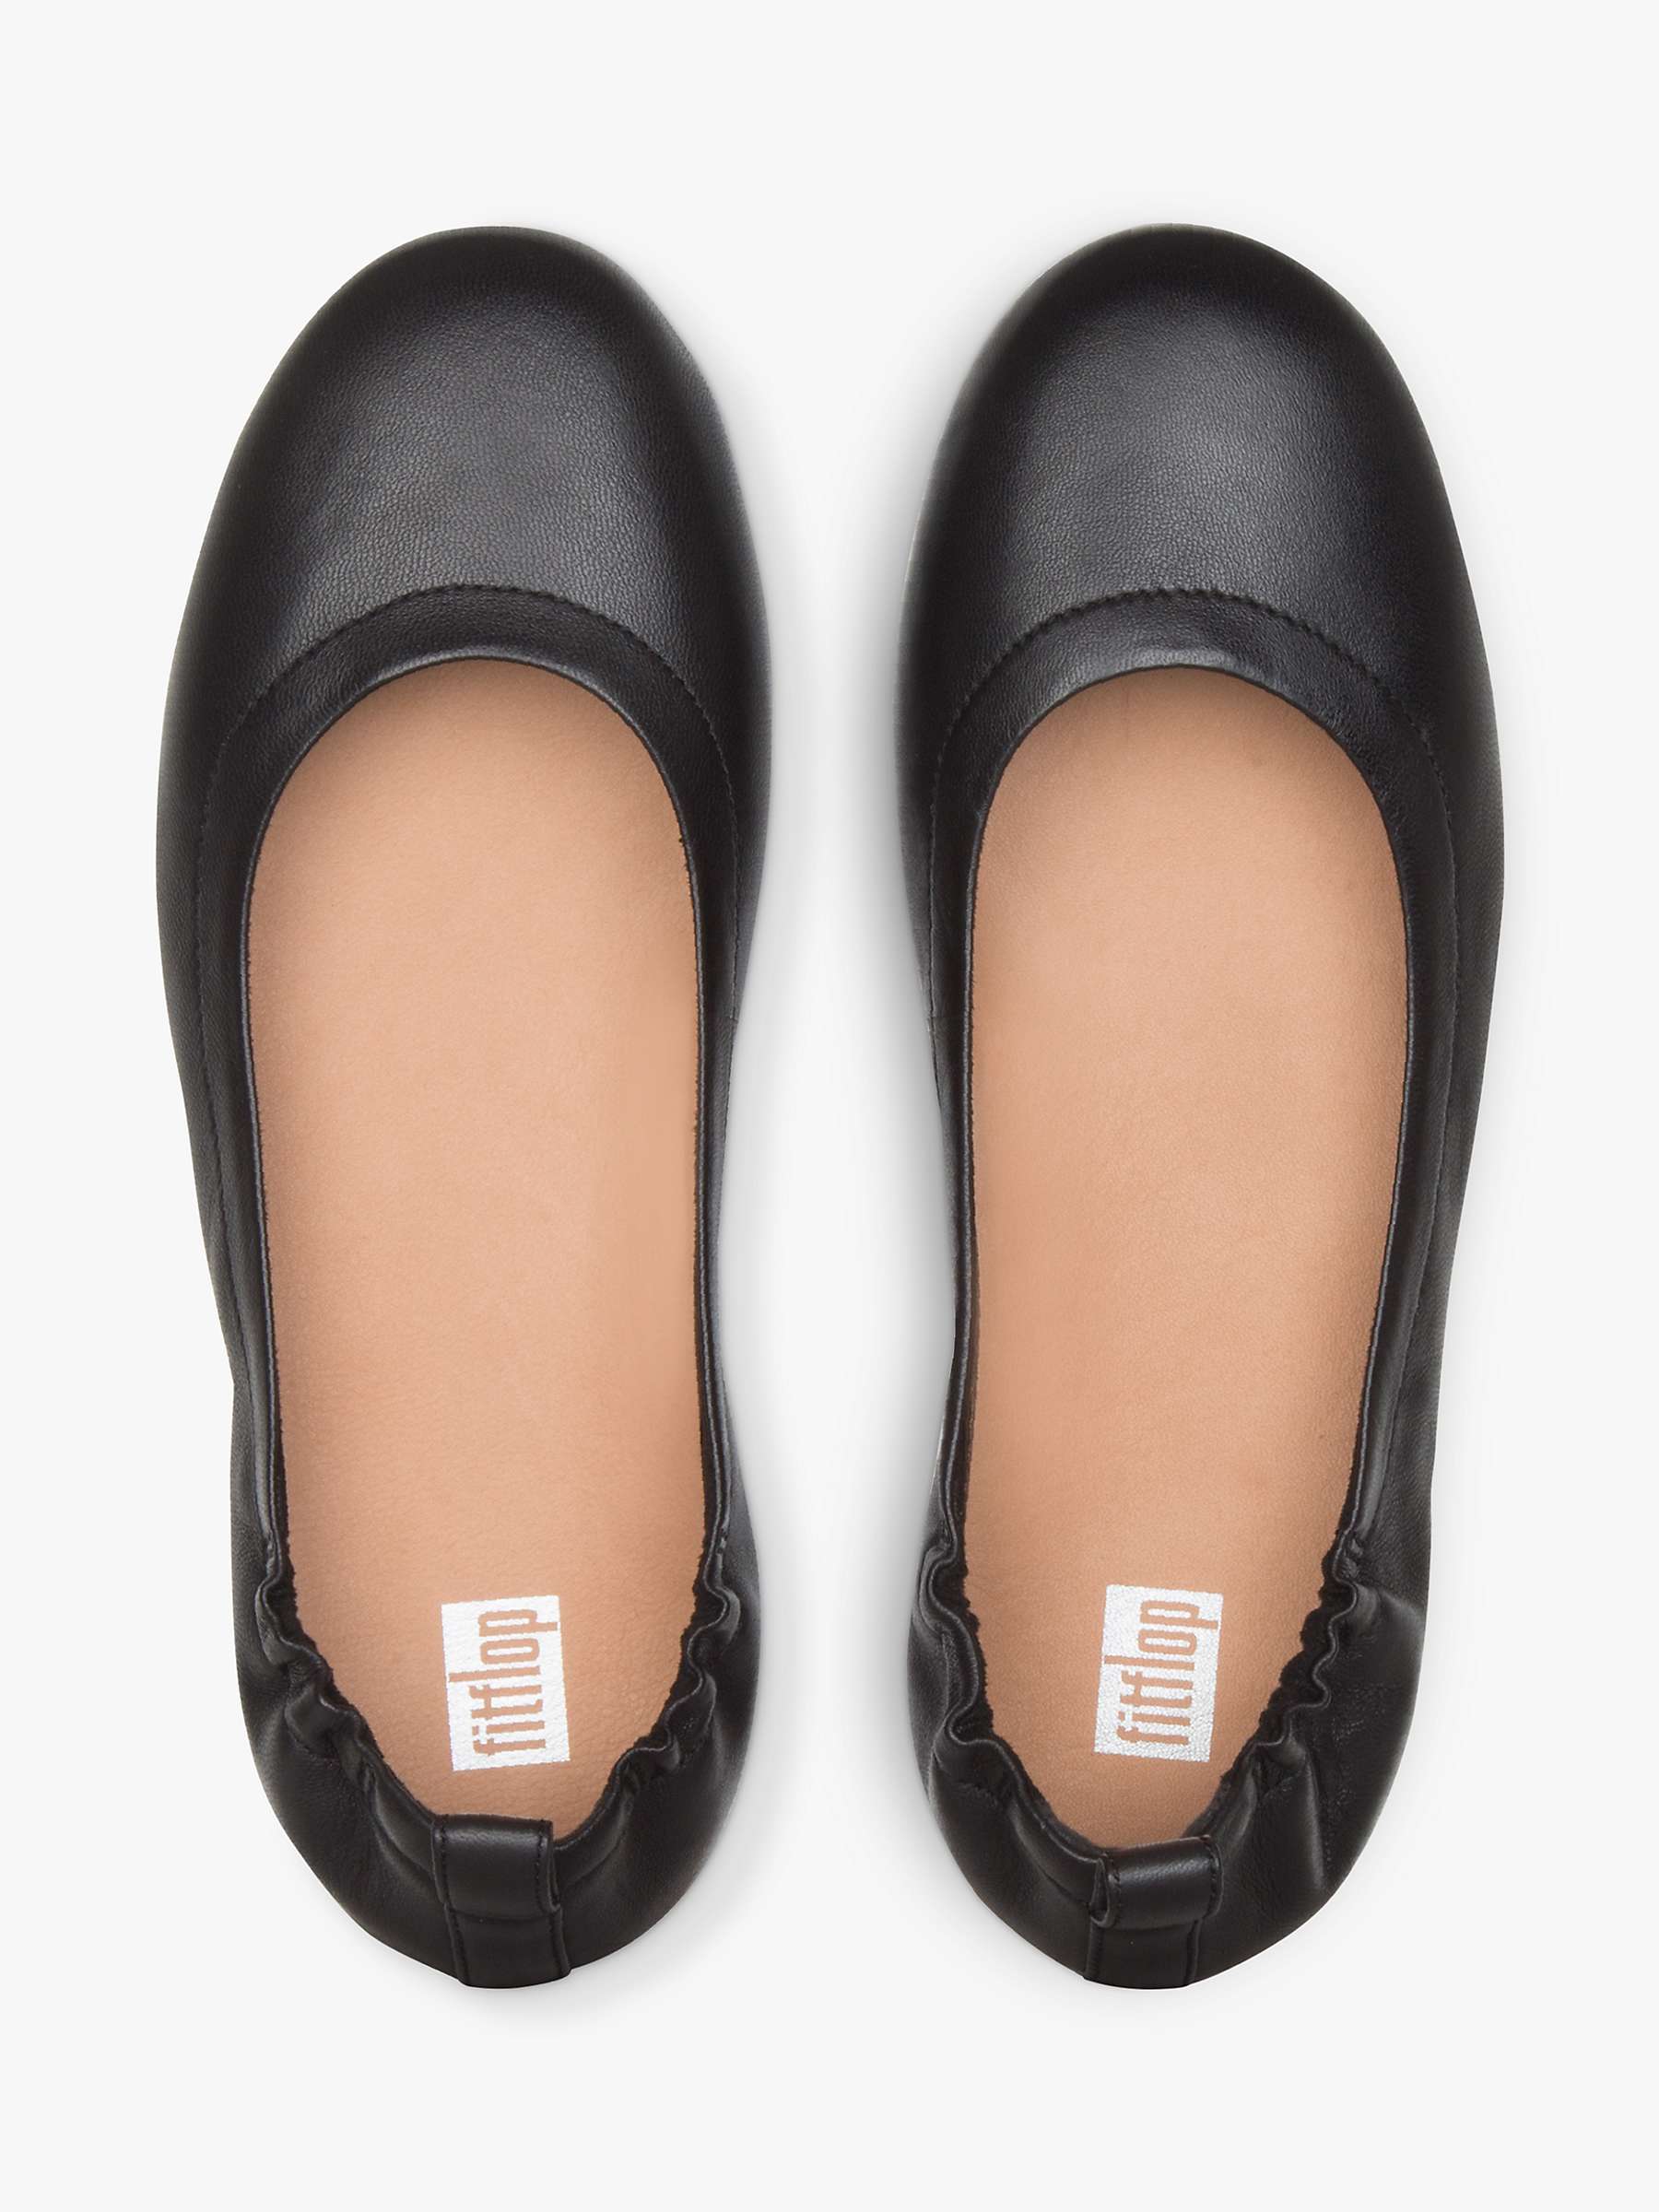 Buy FitFlop Allegro Flat Leather Pumps Online at johnlewis.com